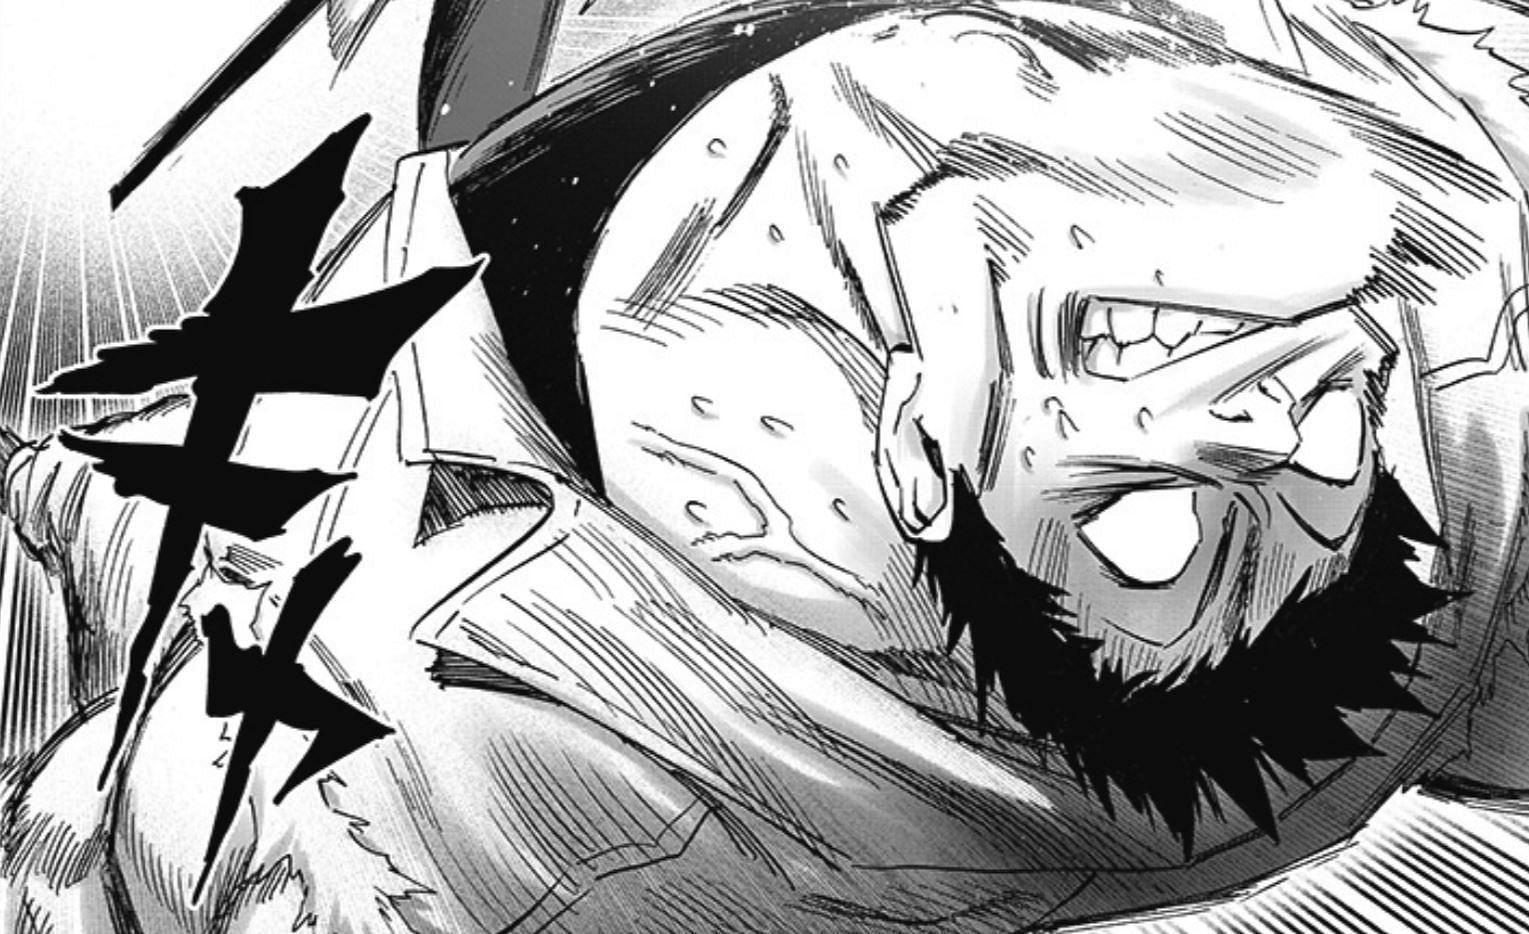 Brawny Muscle as seen in One Punch Man chapter 199 (Image via Shueisha)